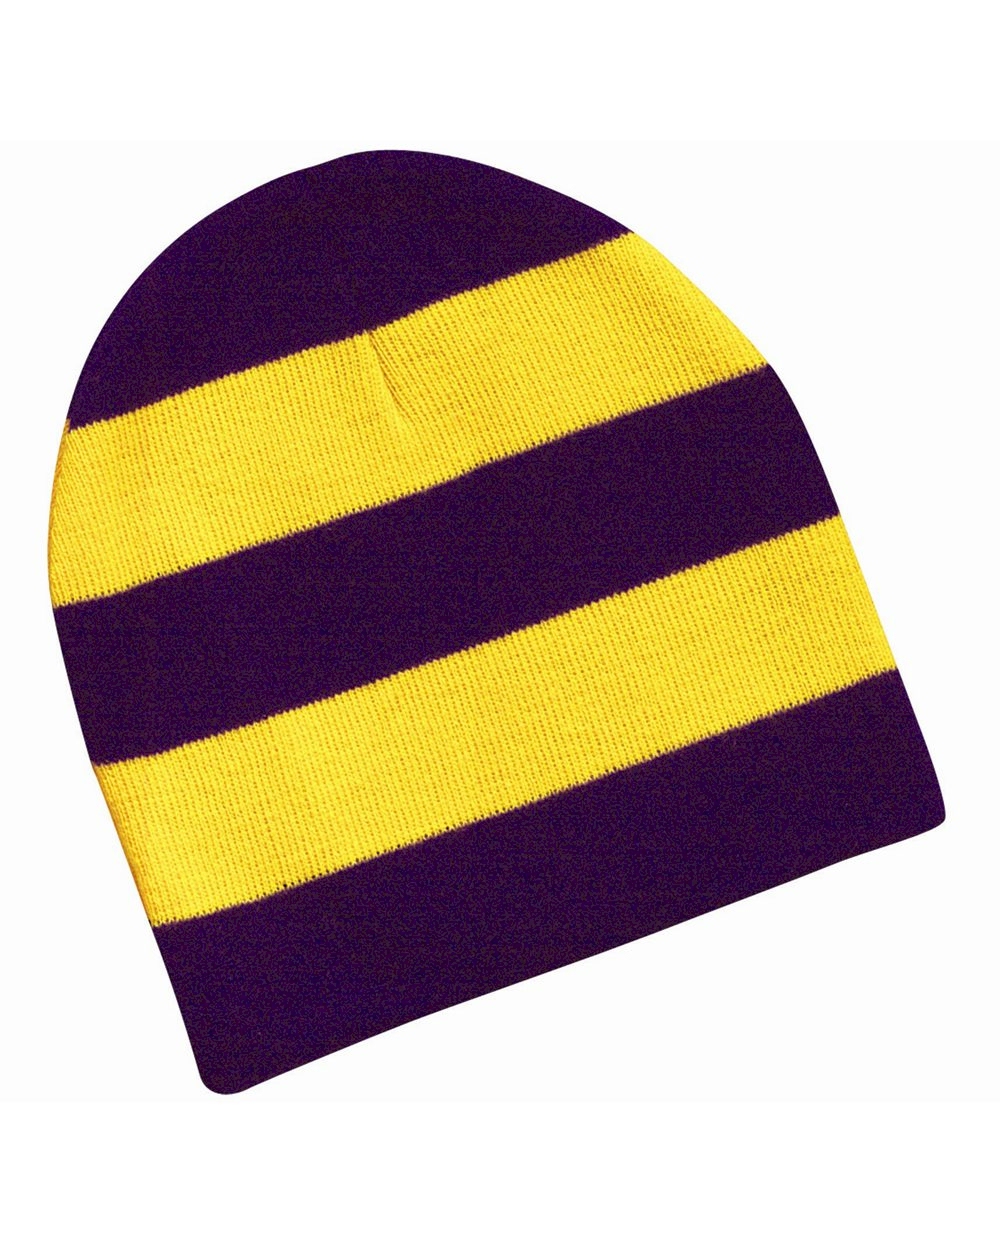 Rugby Striped Knit Beanie Embroidery Blanks - Purple/Gold